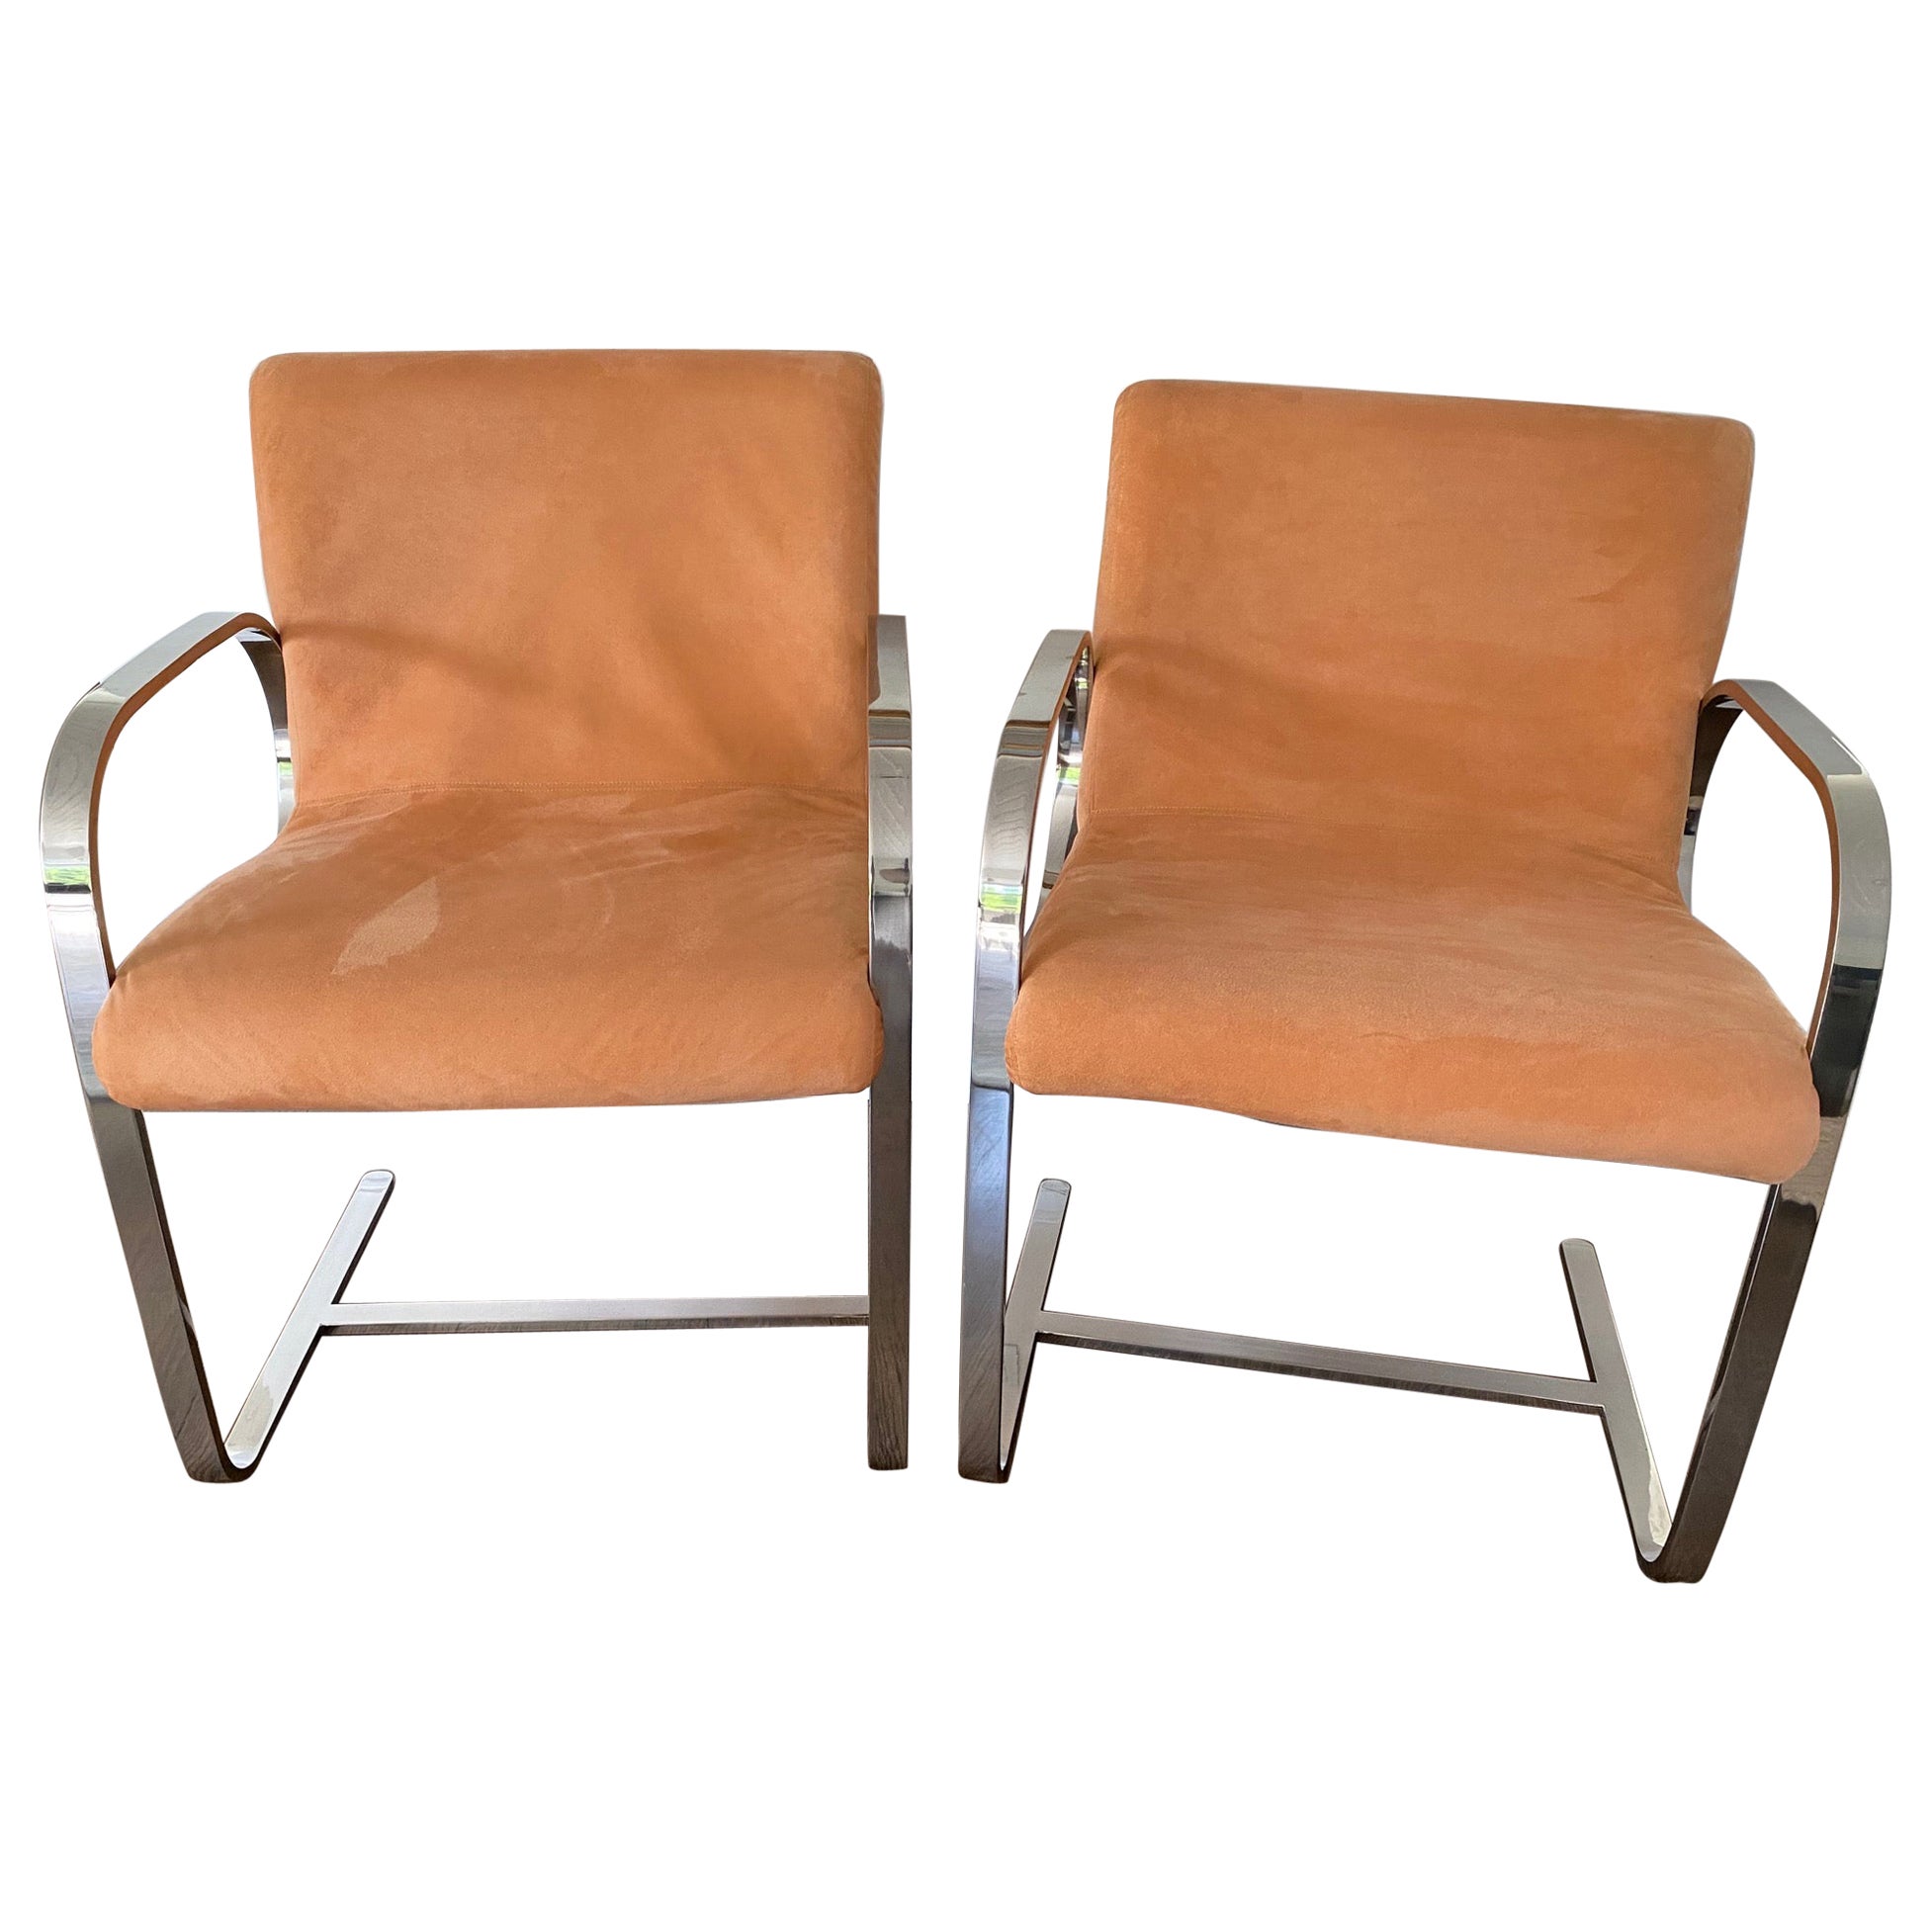 Pair of Mid Century Modern Milo Baughman Style Chrome & Ultrasuede Club Chairs For Sale